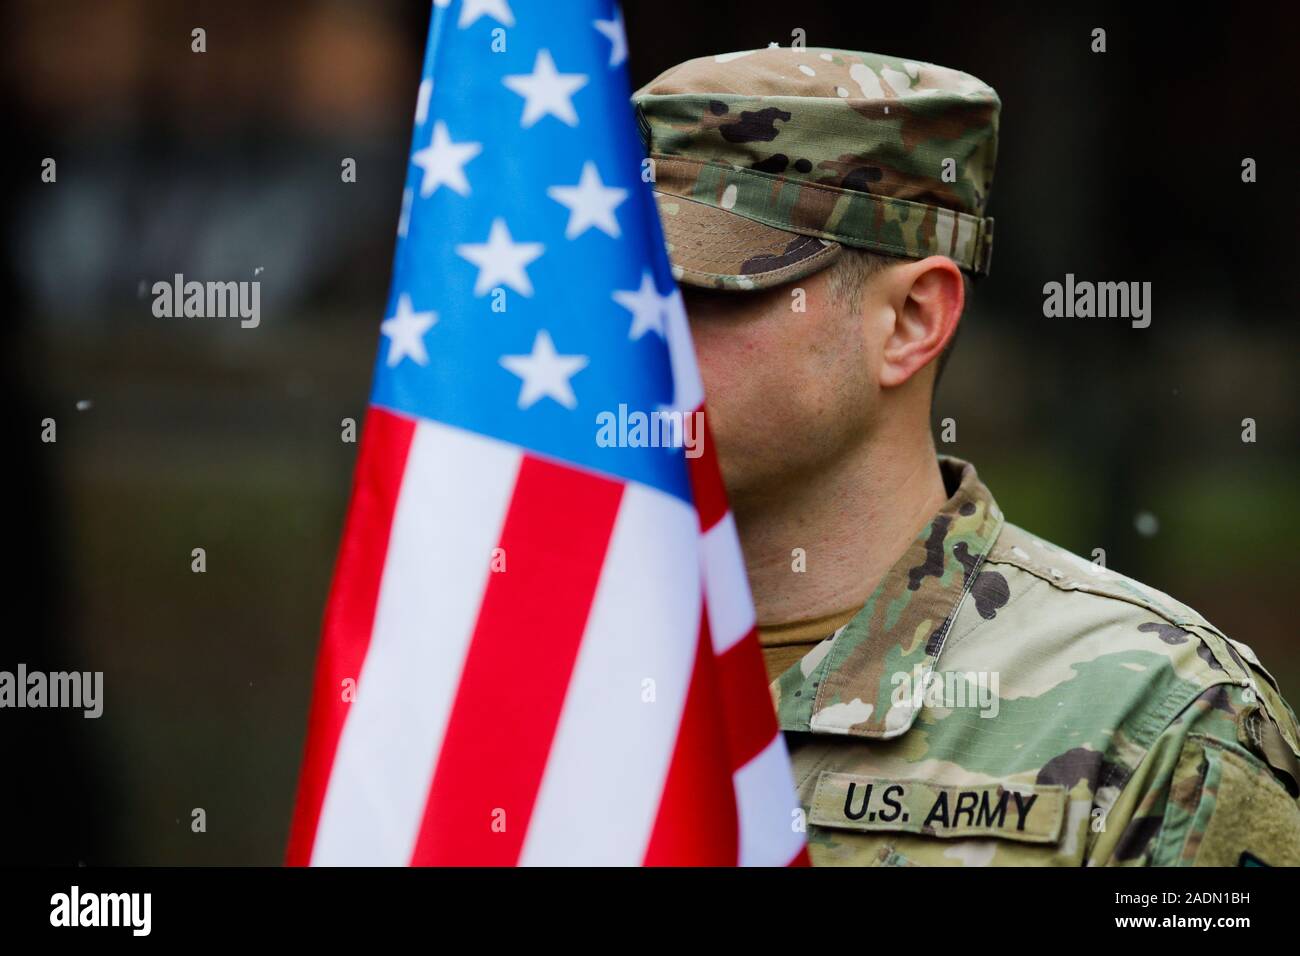 Shallow depth of field image (selective focus) with details of a US army soldier holding a flag and having MNDSE (Multi-National Division South-East) Stock Photo